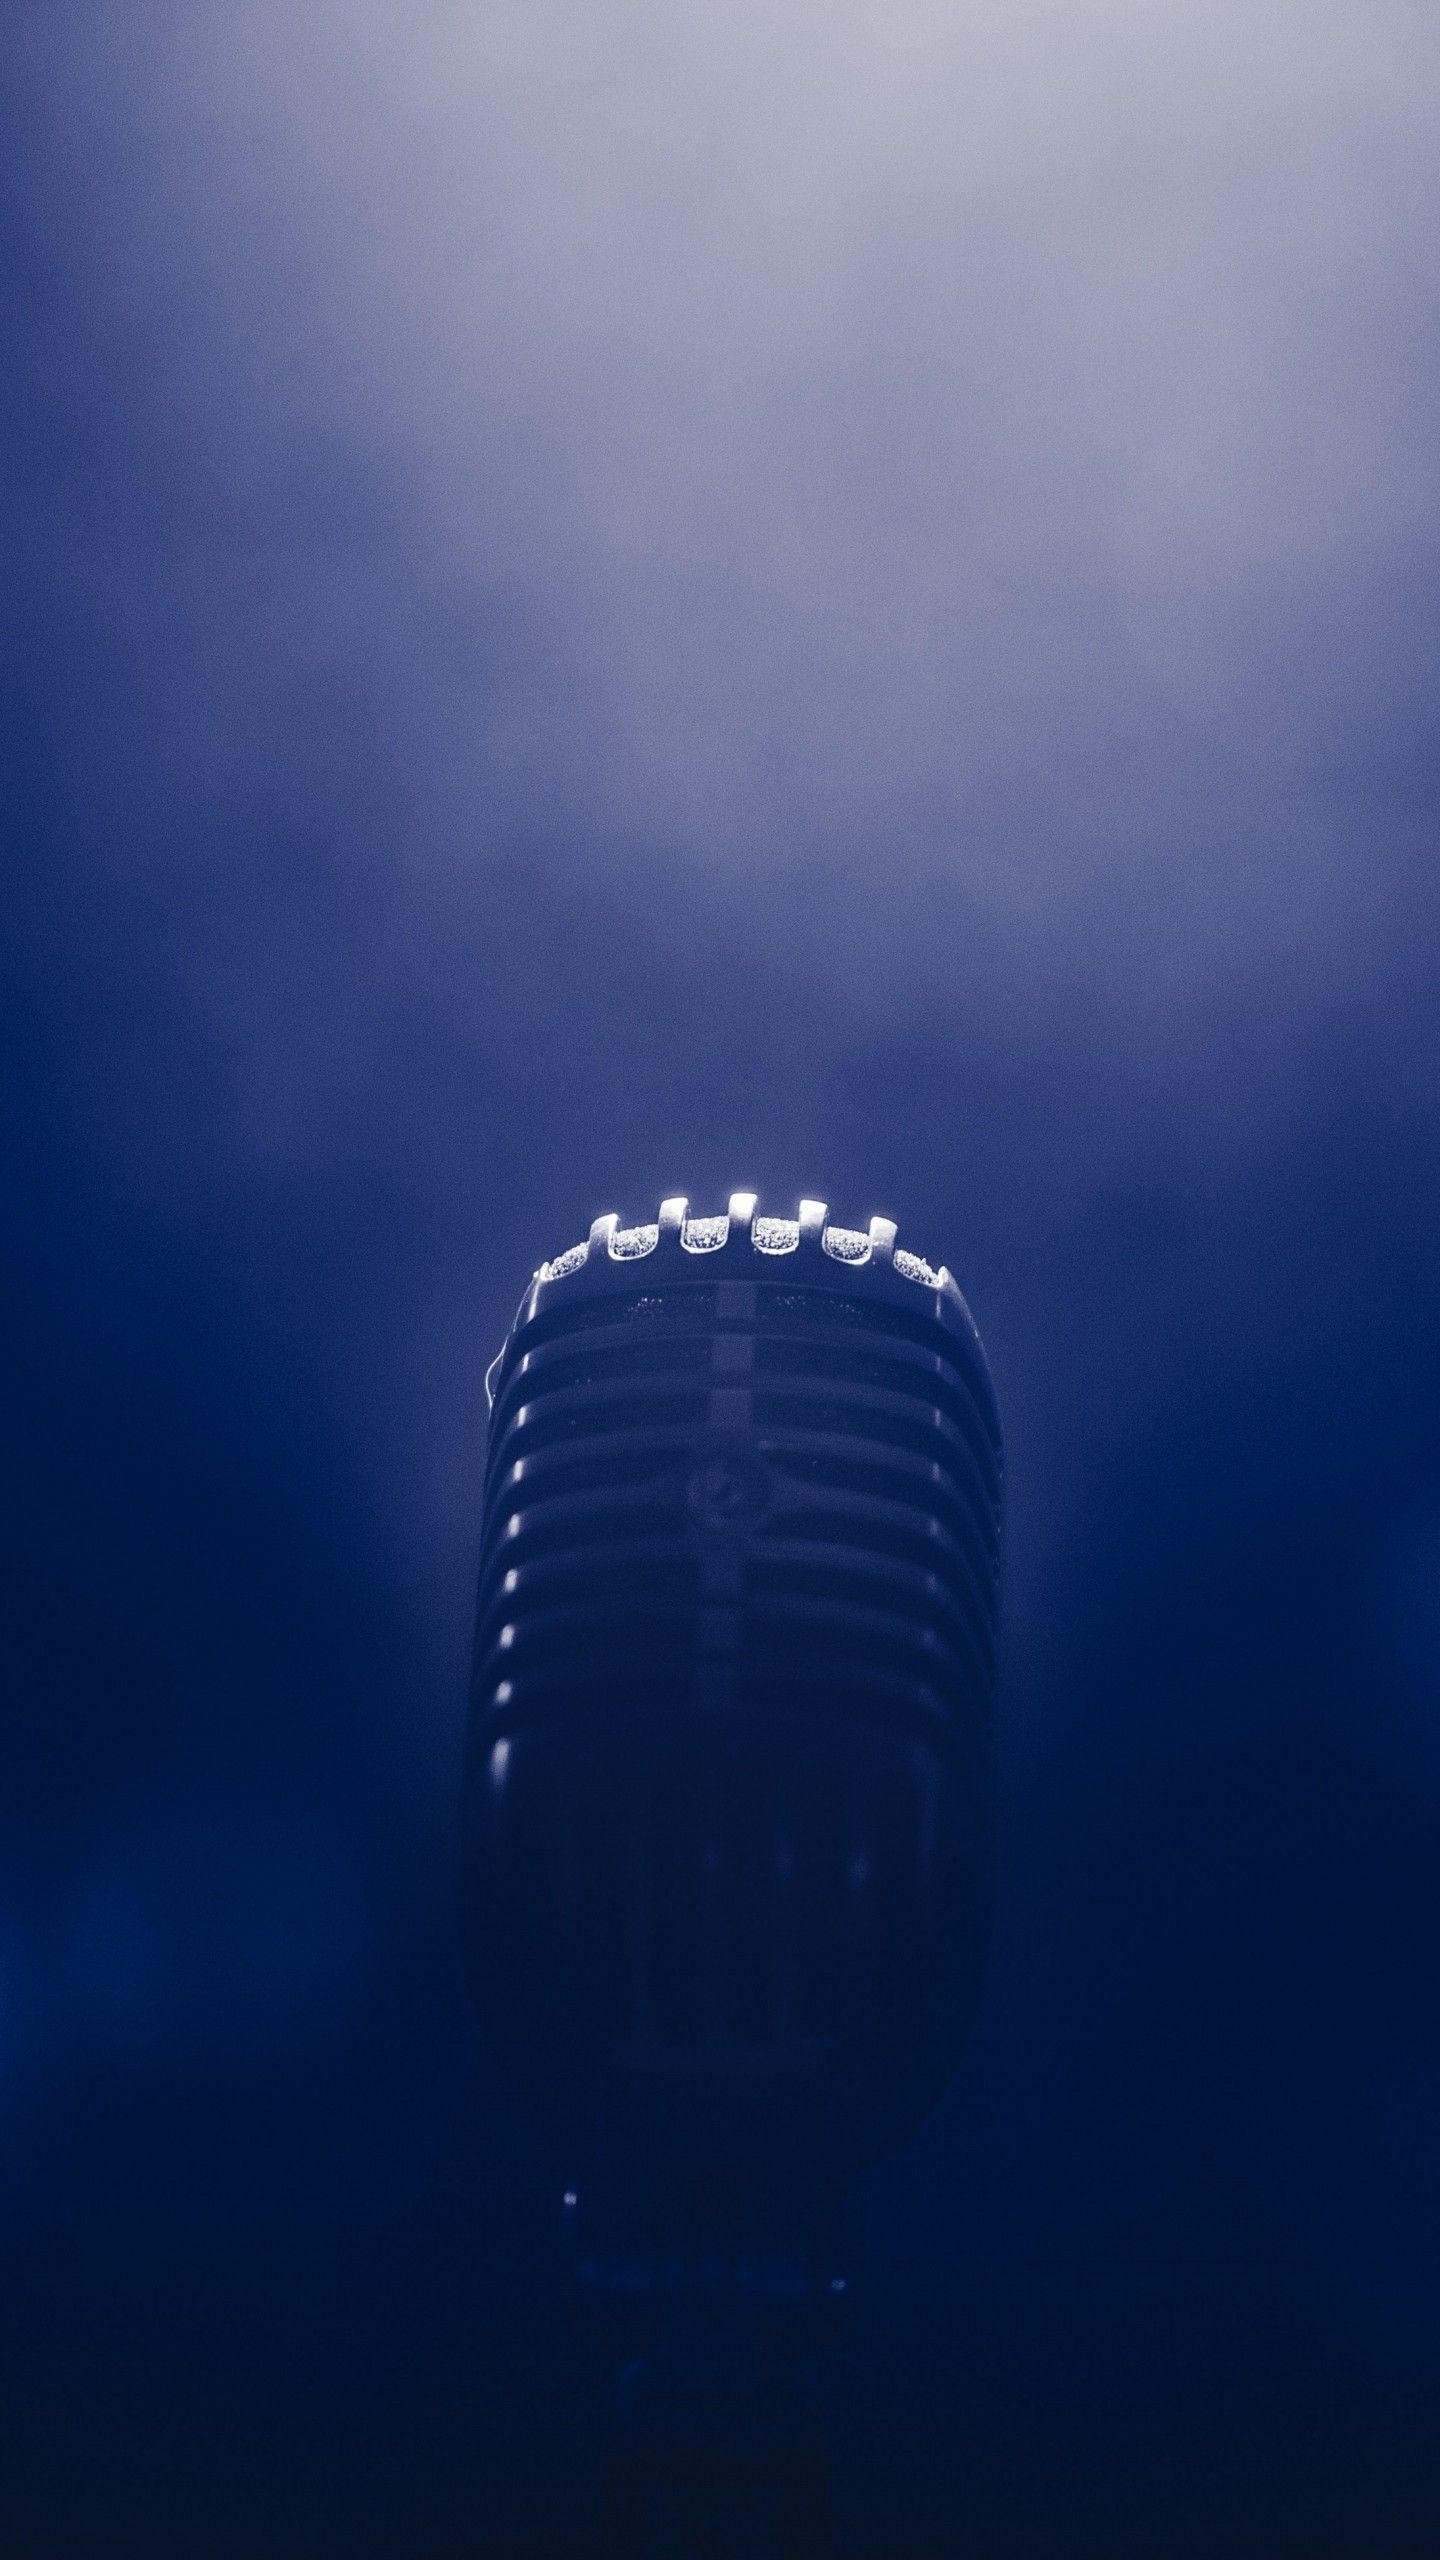 Smoke-filled atmosphere, Musical vibes, Captivating microphone, Enigmatic background, 1440x2560 HD Handy